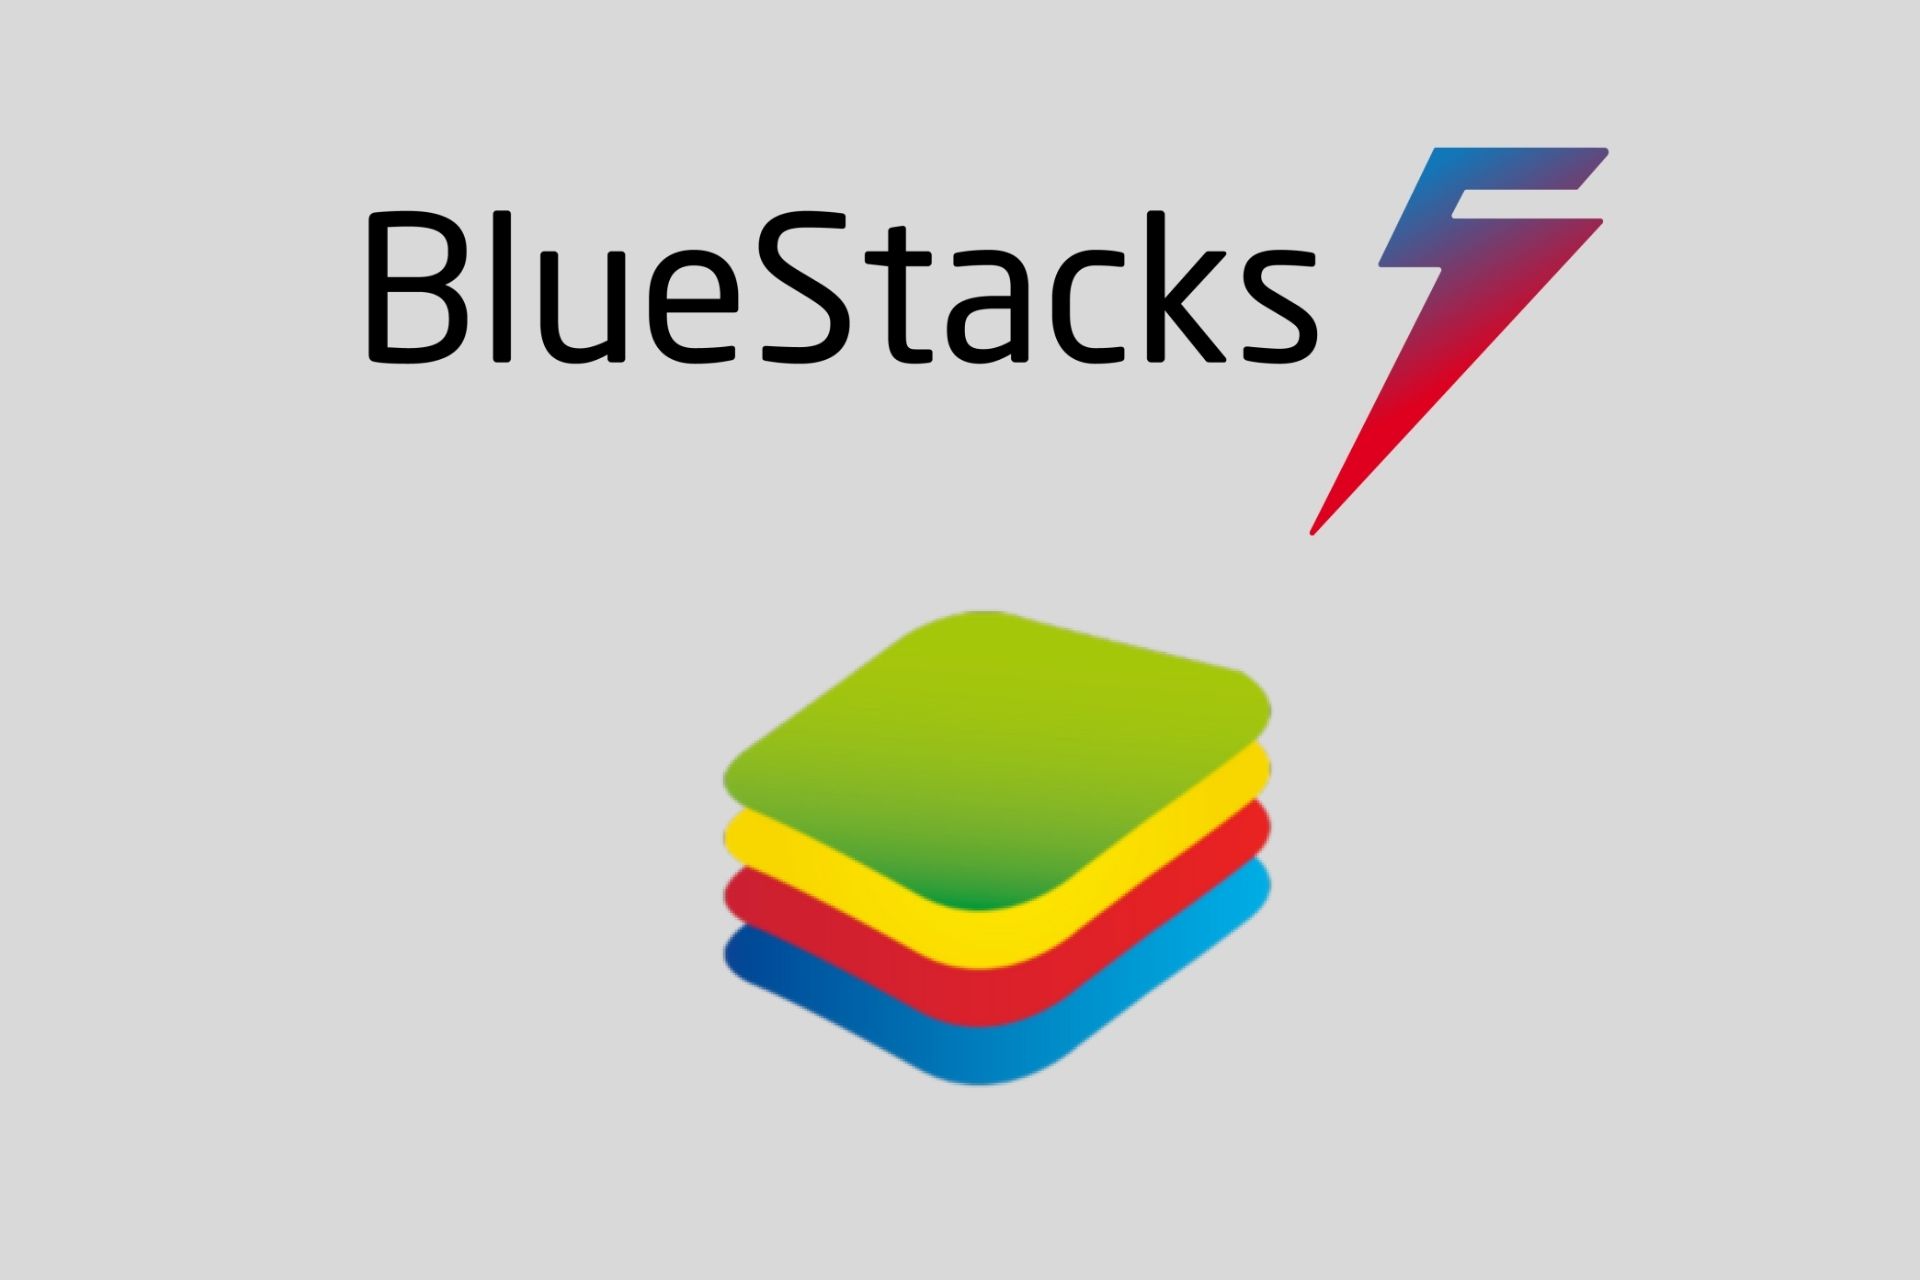 How to download BlueStacks Android emulator for Windows 10